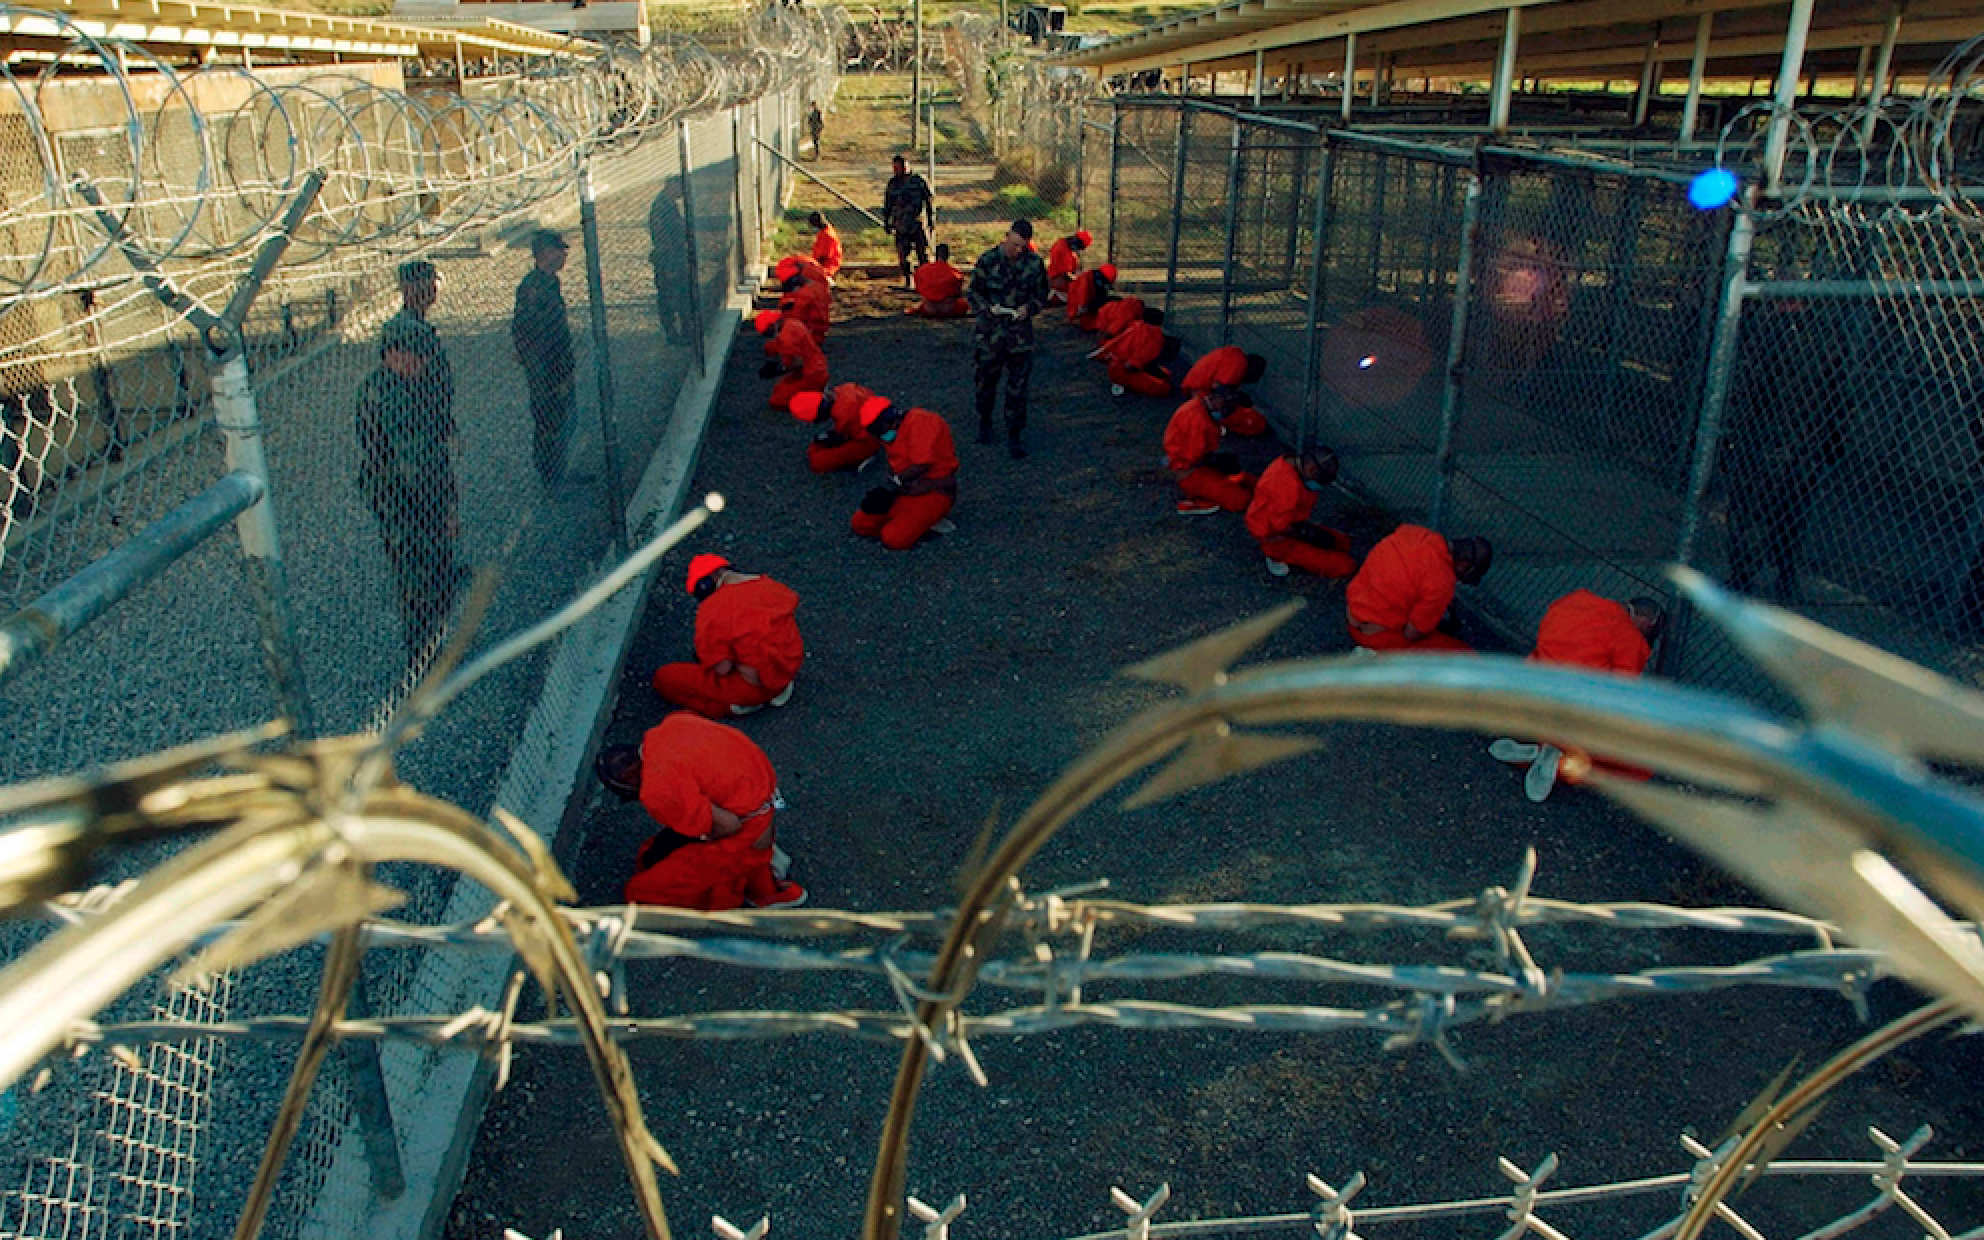 Detainees in orange jumpsuits sit in a holding area under the watchful eyes of Military Police at Camp X-Ray at Naval Base Guantanamo Bay, Cuba, during in-processing to the temporary detention facility on January 11, 2002. REUTERS/DoD/Shane T. McCoy